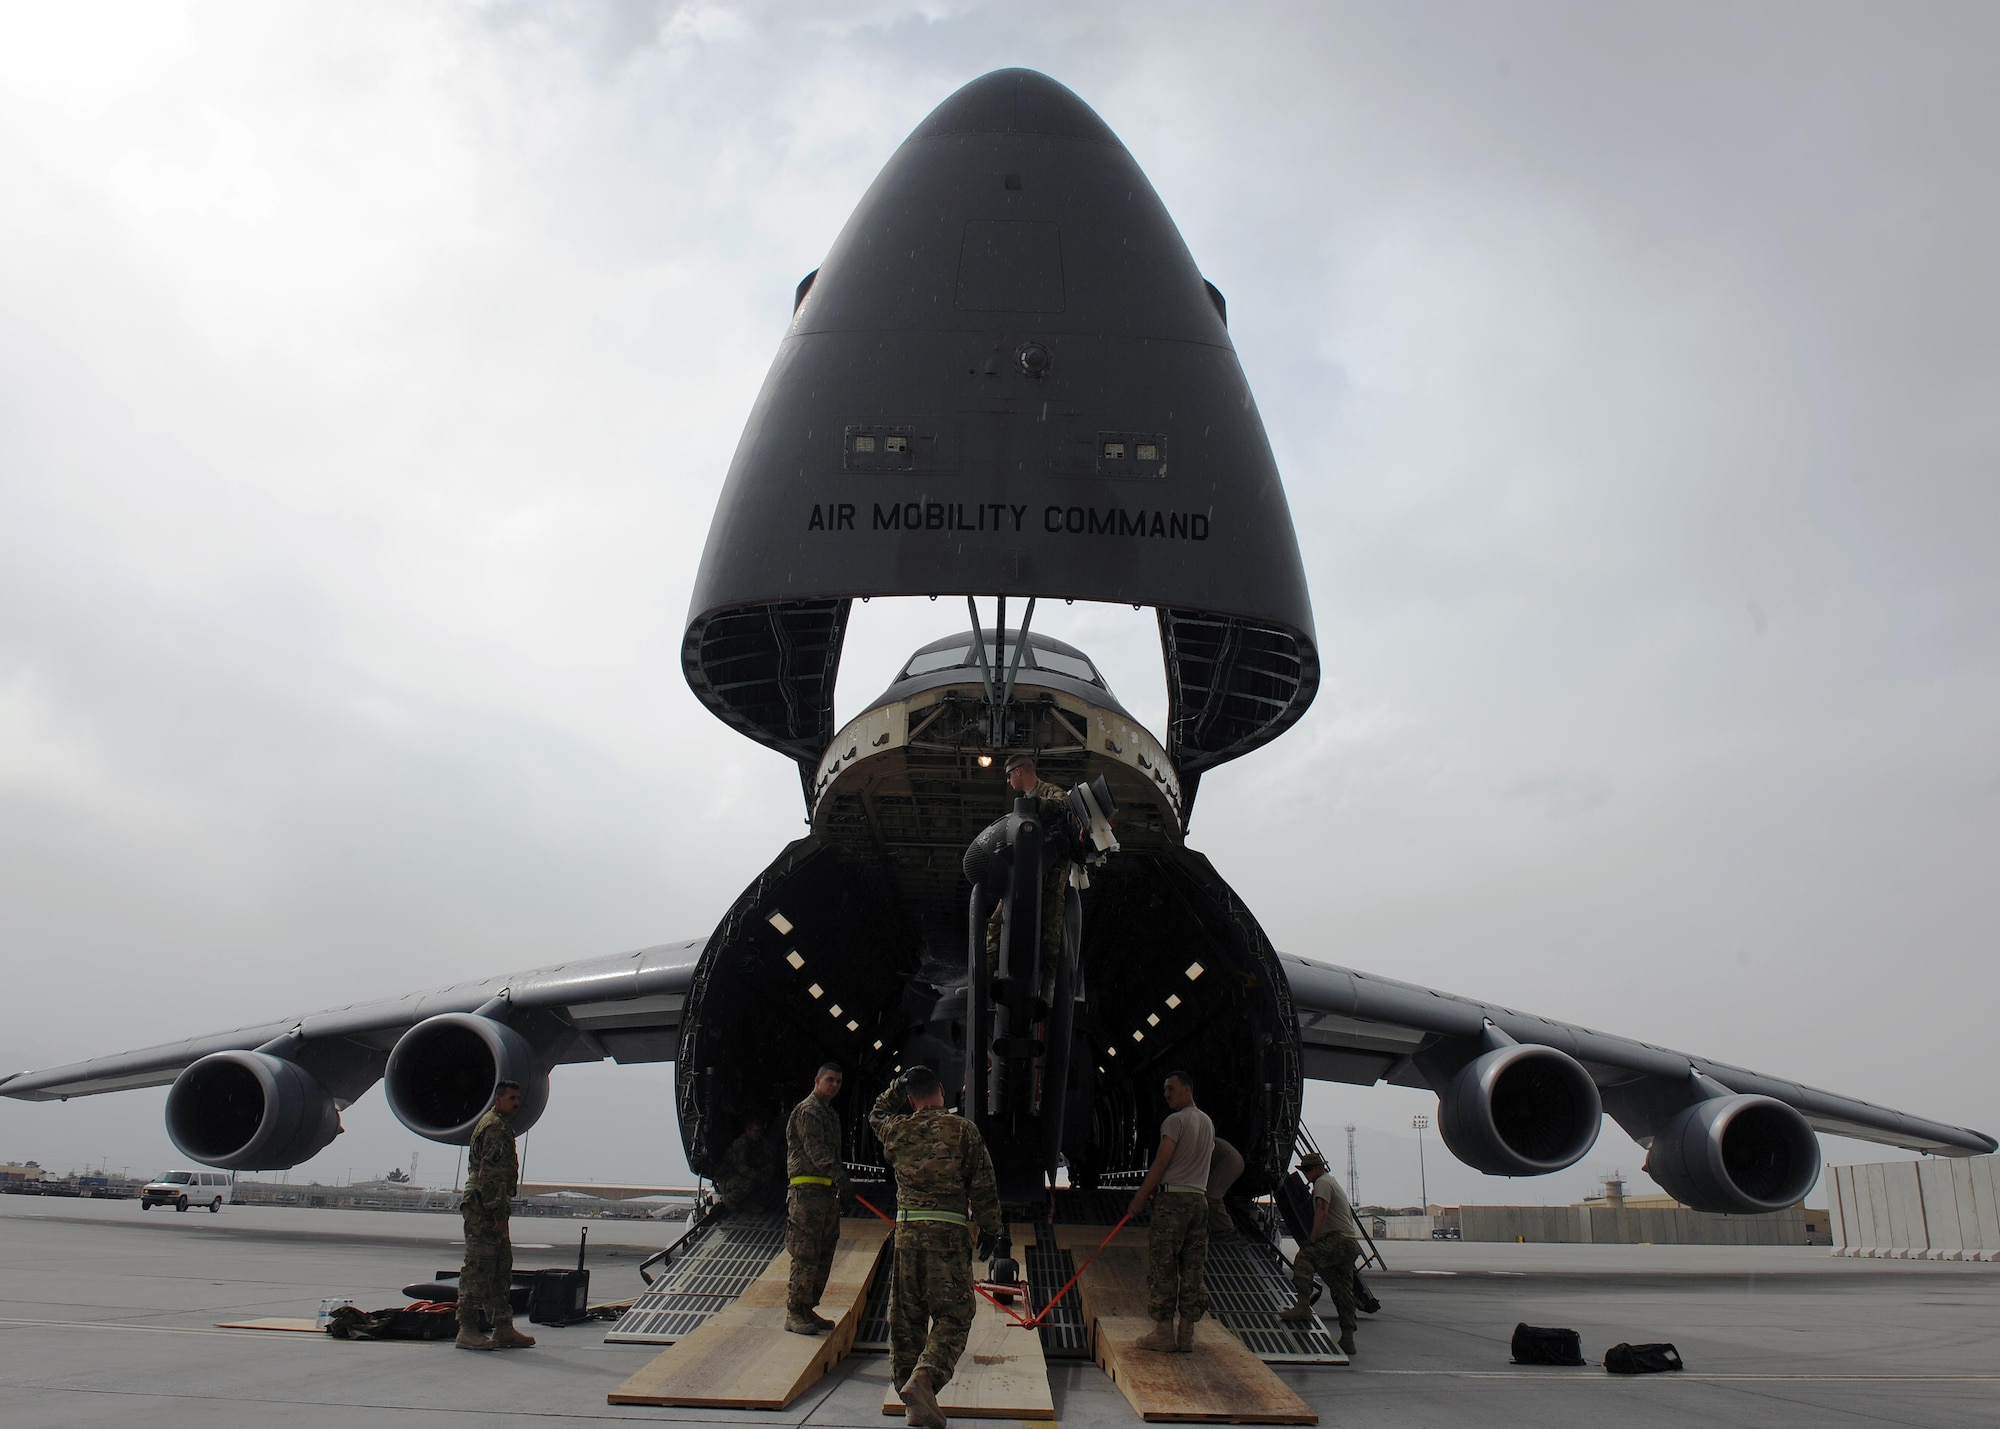 U.S. Soldiers assigned to the 96th Aviation Support Battalion, 101st Combat Aviation Brigade, spot and position an Army UH-60 Black Hawk helicopter during upload onto a C-5 Super Galaxy aircraft April 26, 2015 at Bagram Airfield, Afghanistan. Throughout April, several helicopters were uploaded and transported to the United States to facilitate the swap out of the Army’s 82nd and 101st Combat Aviation Brigades. (U.S. Air Force photo by Staff Sgt. Whitney Amstutz/Released)